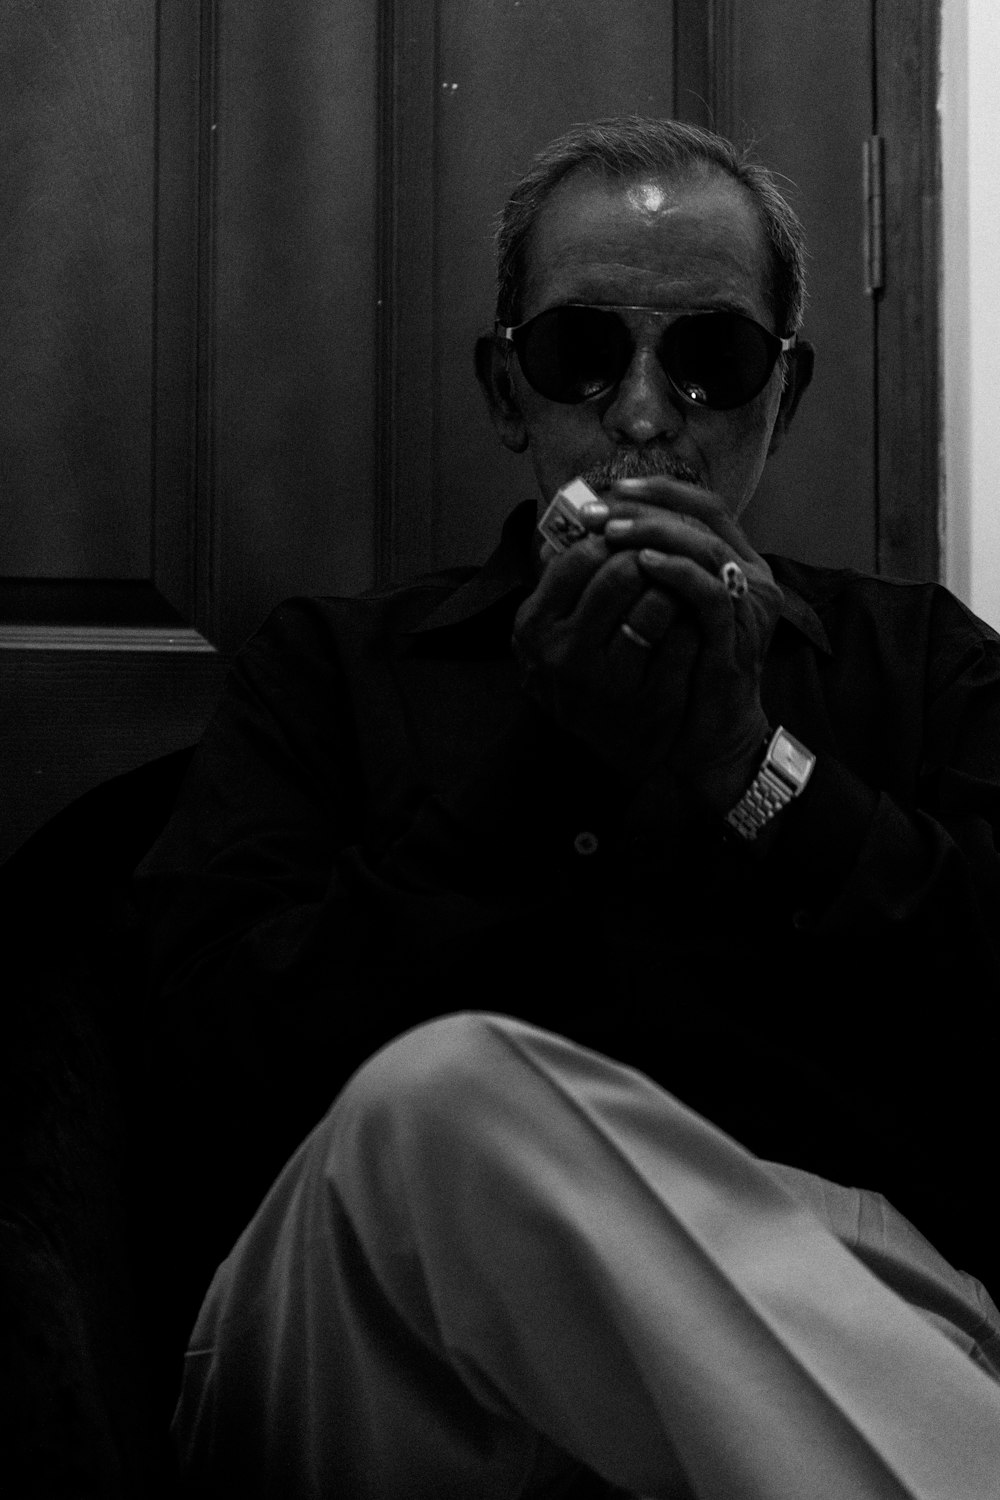 man in black coat and sunglasses sitting on chair